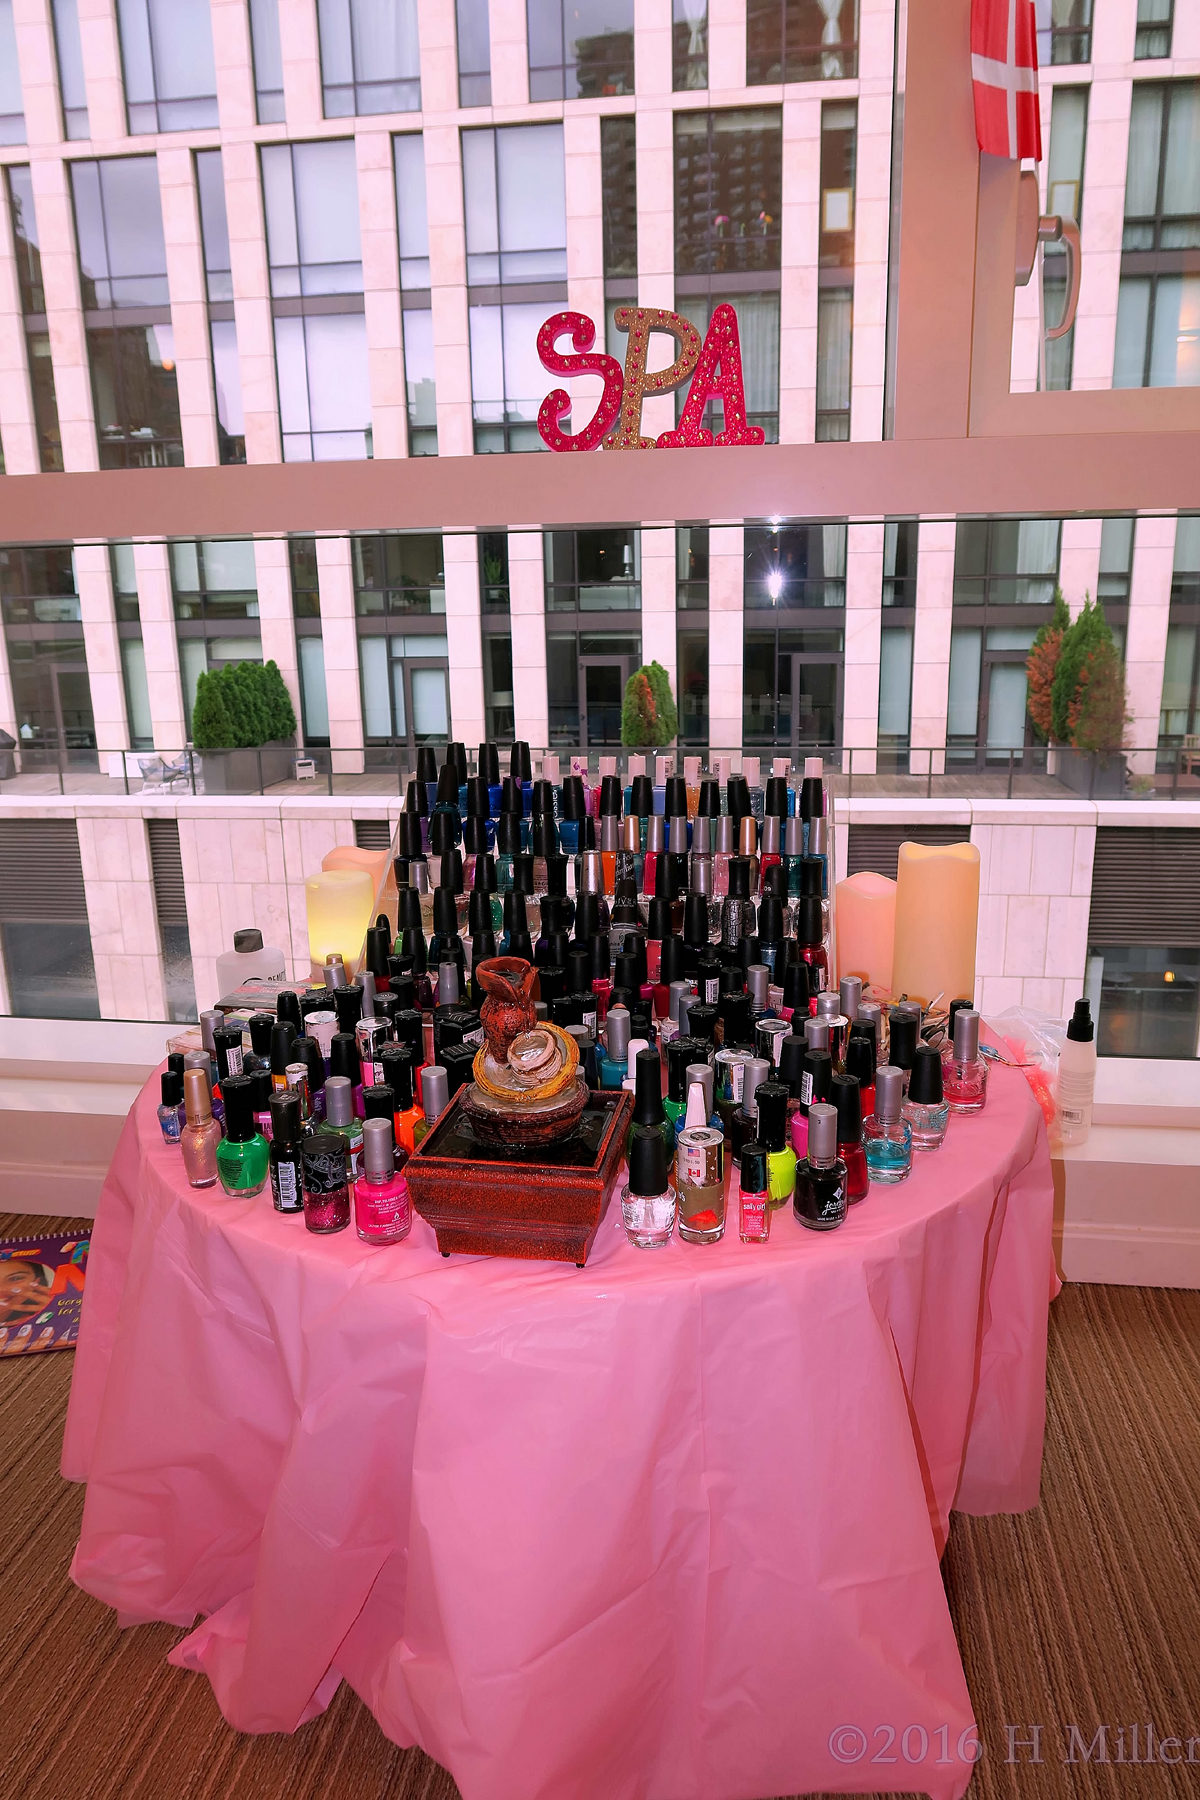 There's So Much Nail Polish To Choose From!